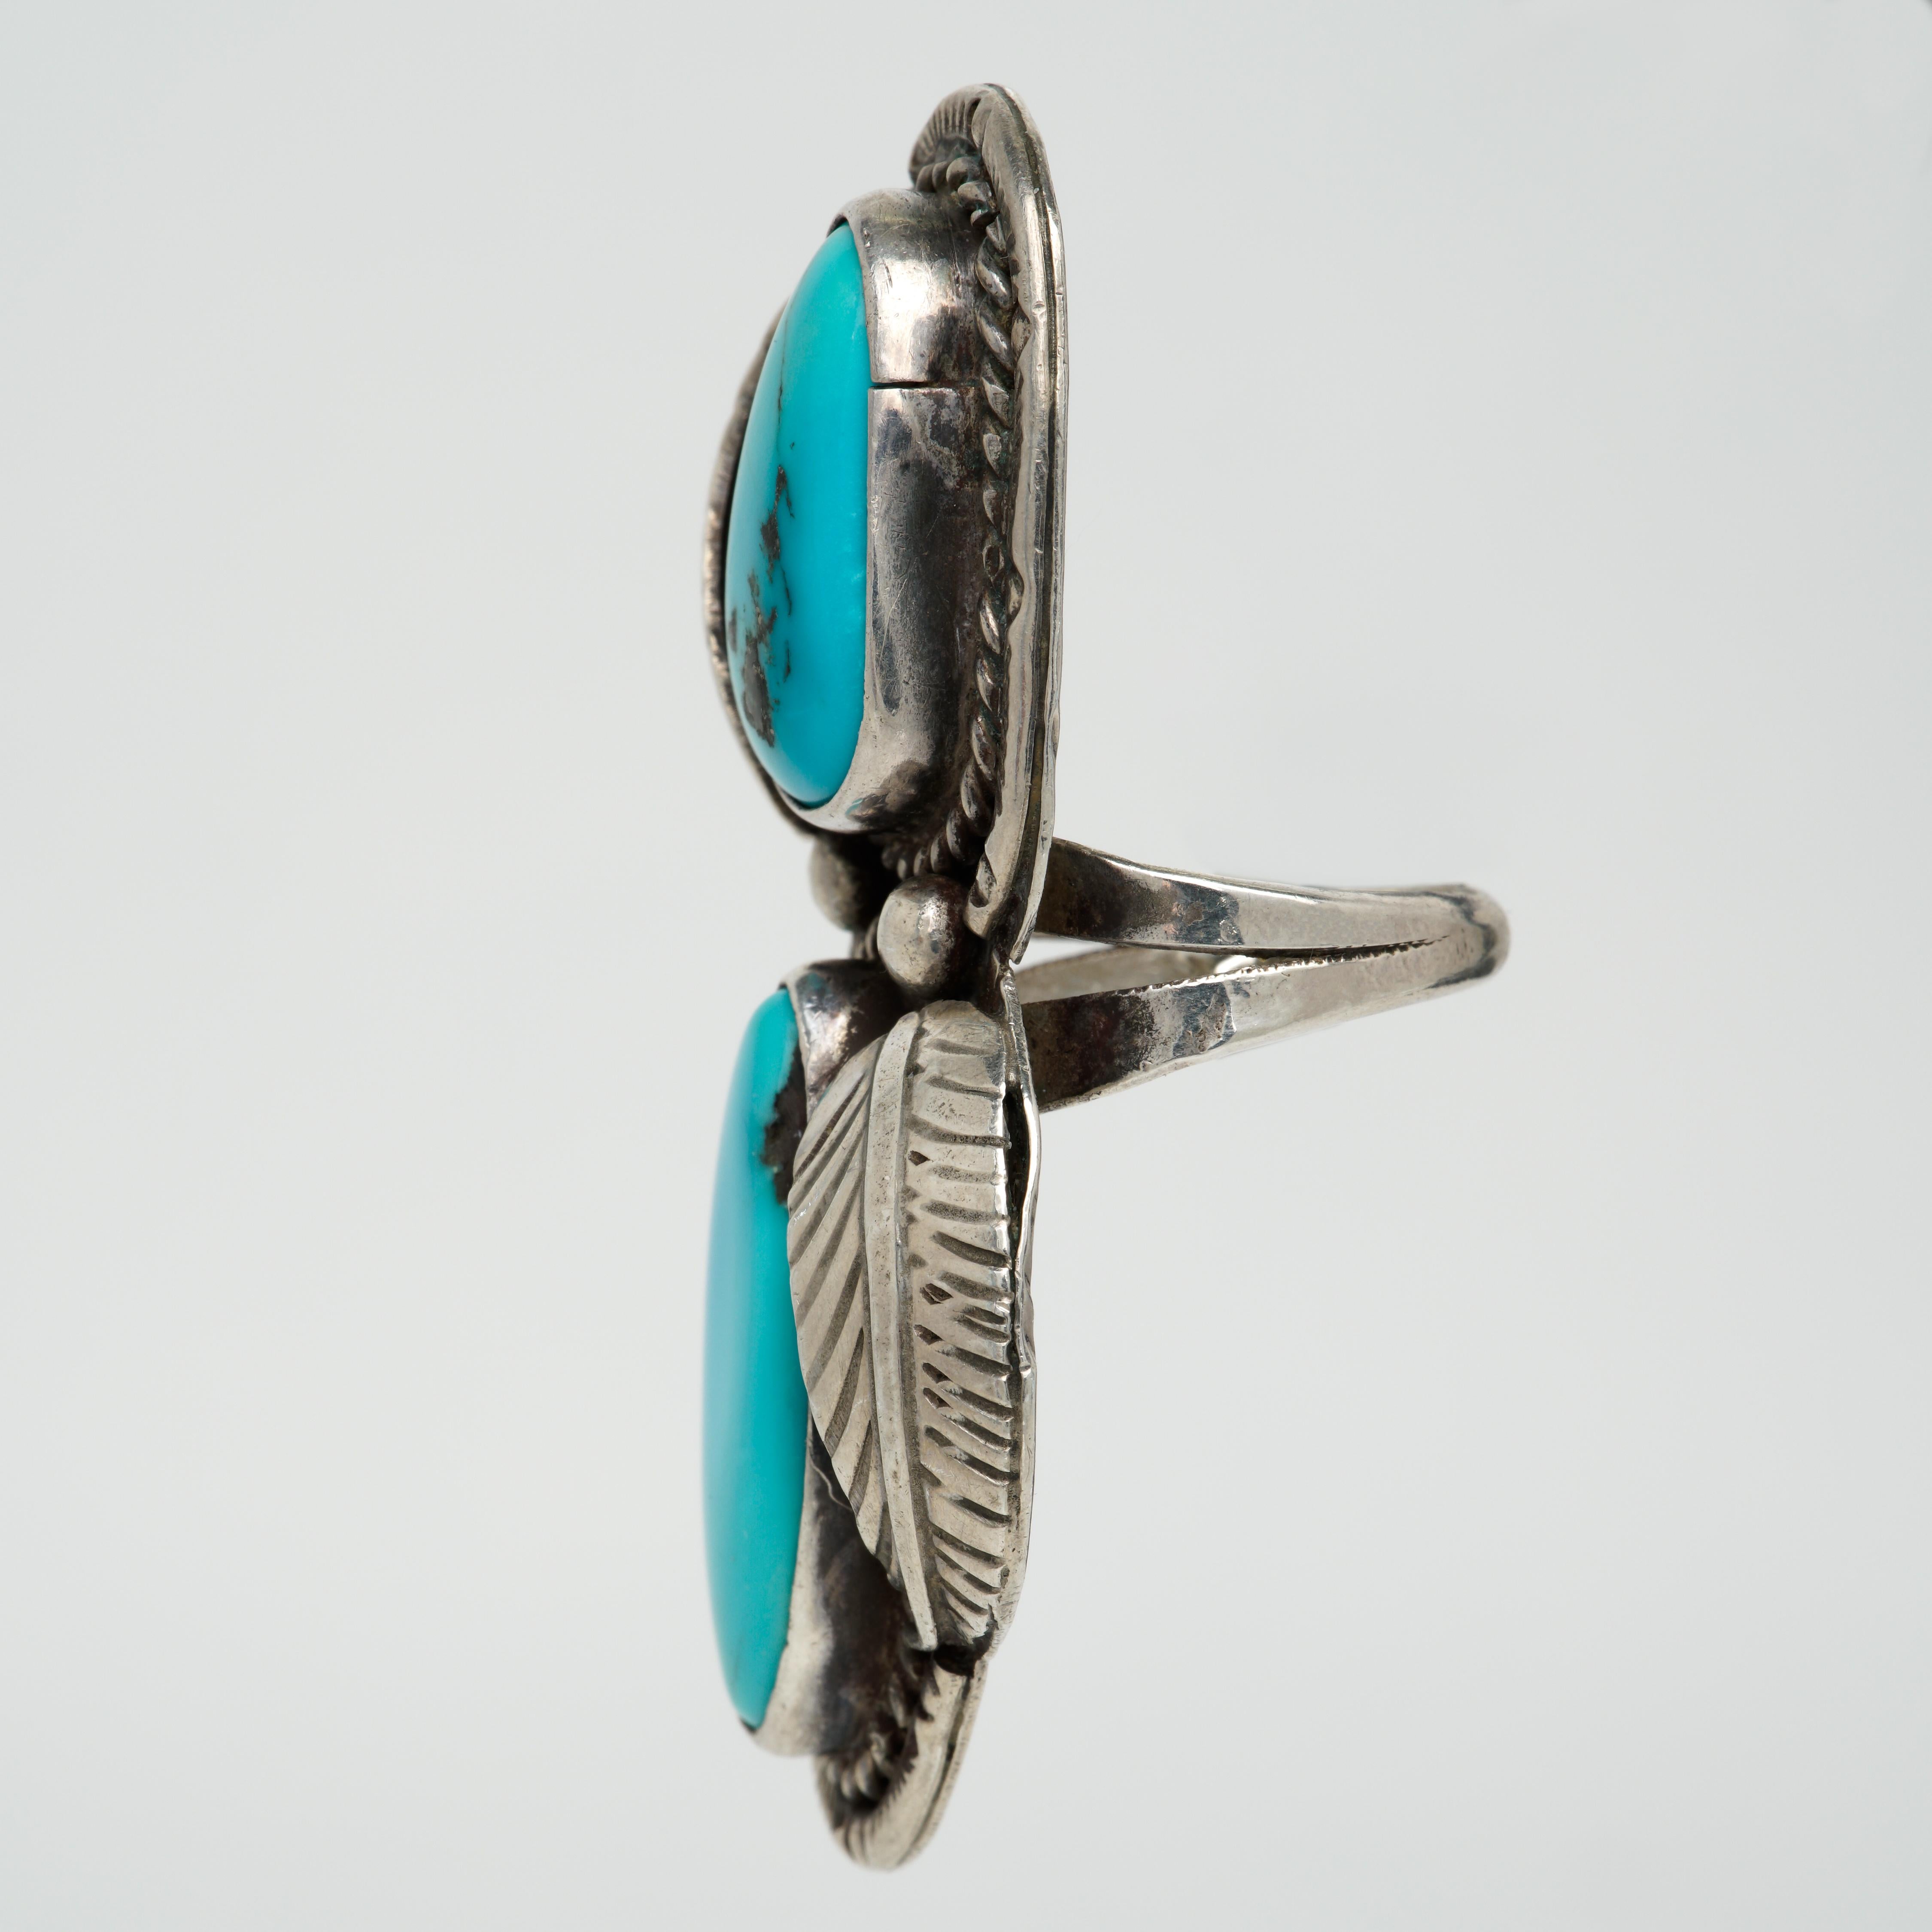 Vintage Navajo Native American Silver Sleeping Beauty Turquoise Statement Ring c. 1970s

A wonderful 